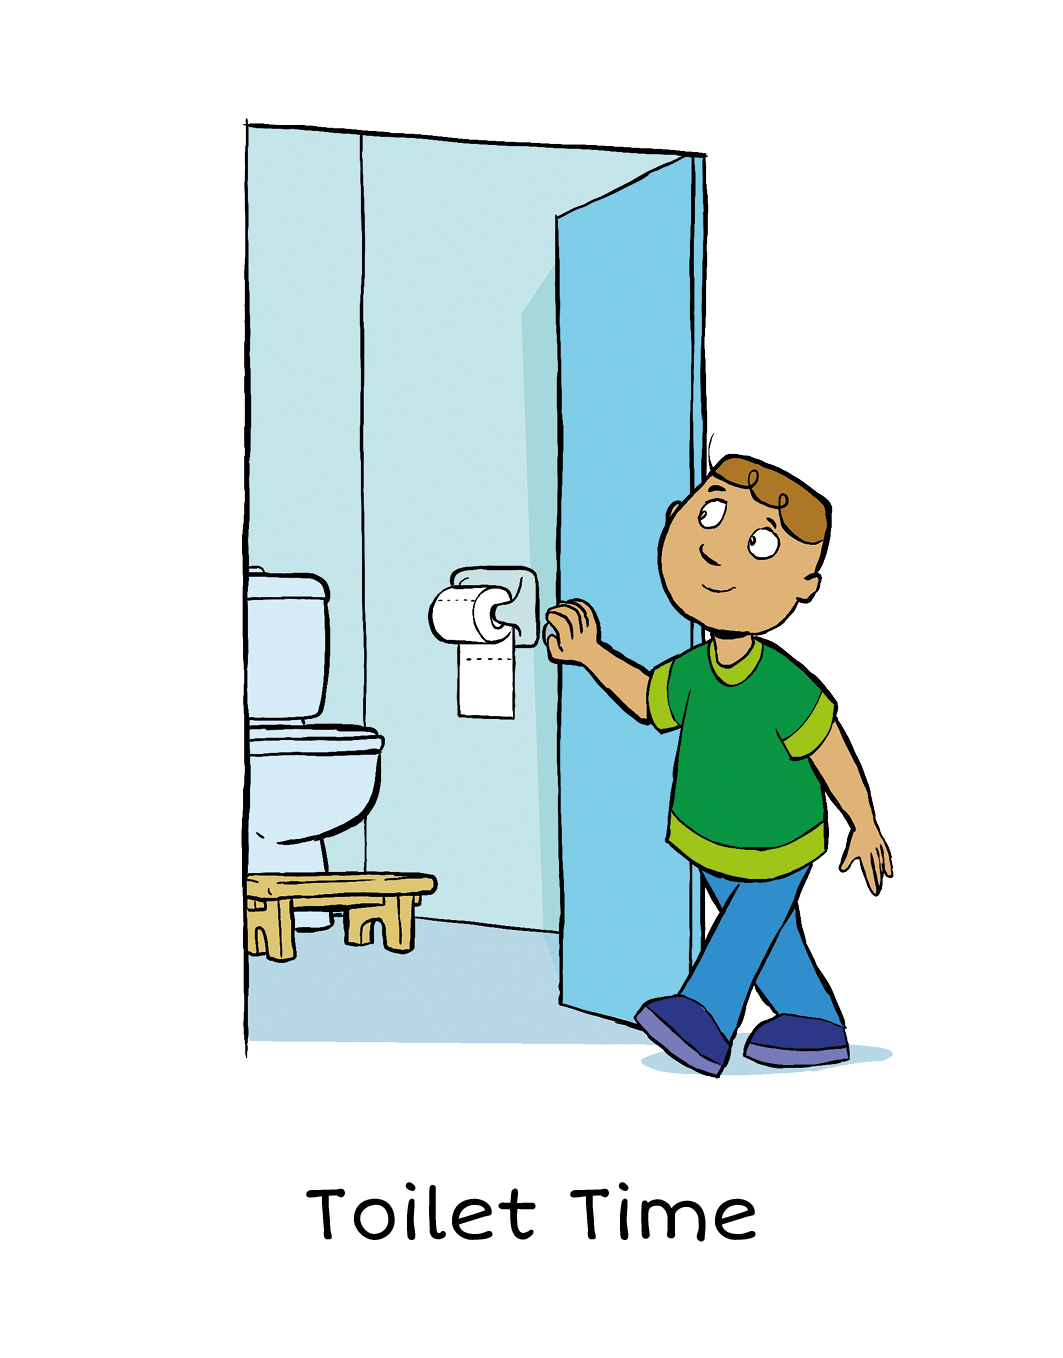 Toilet Time: Visual cards for boys learning to use the toilet for wee and poo